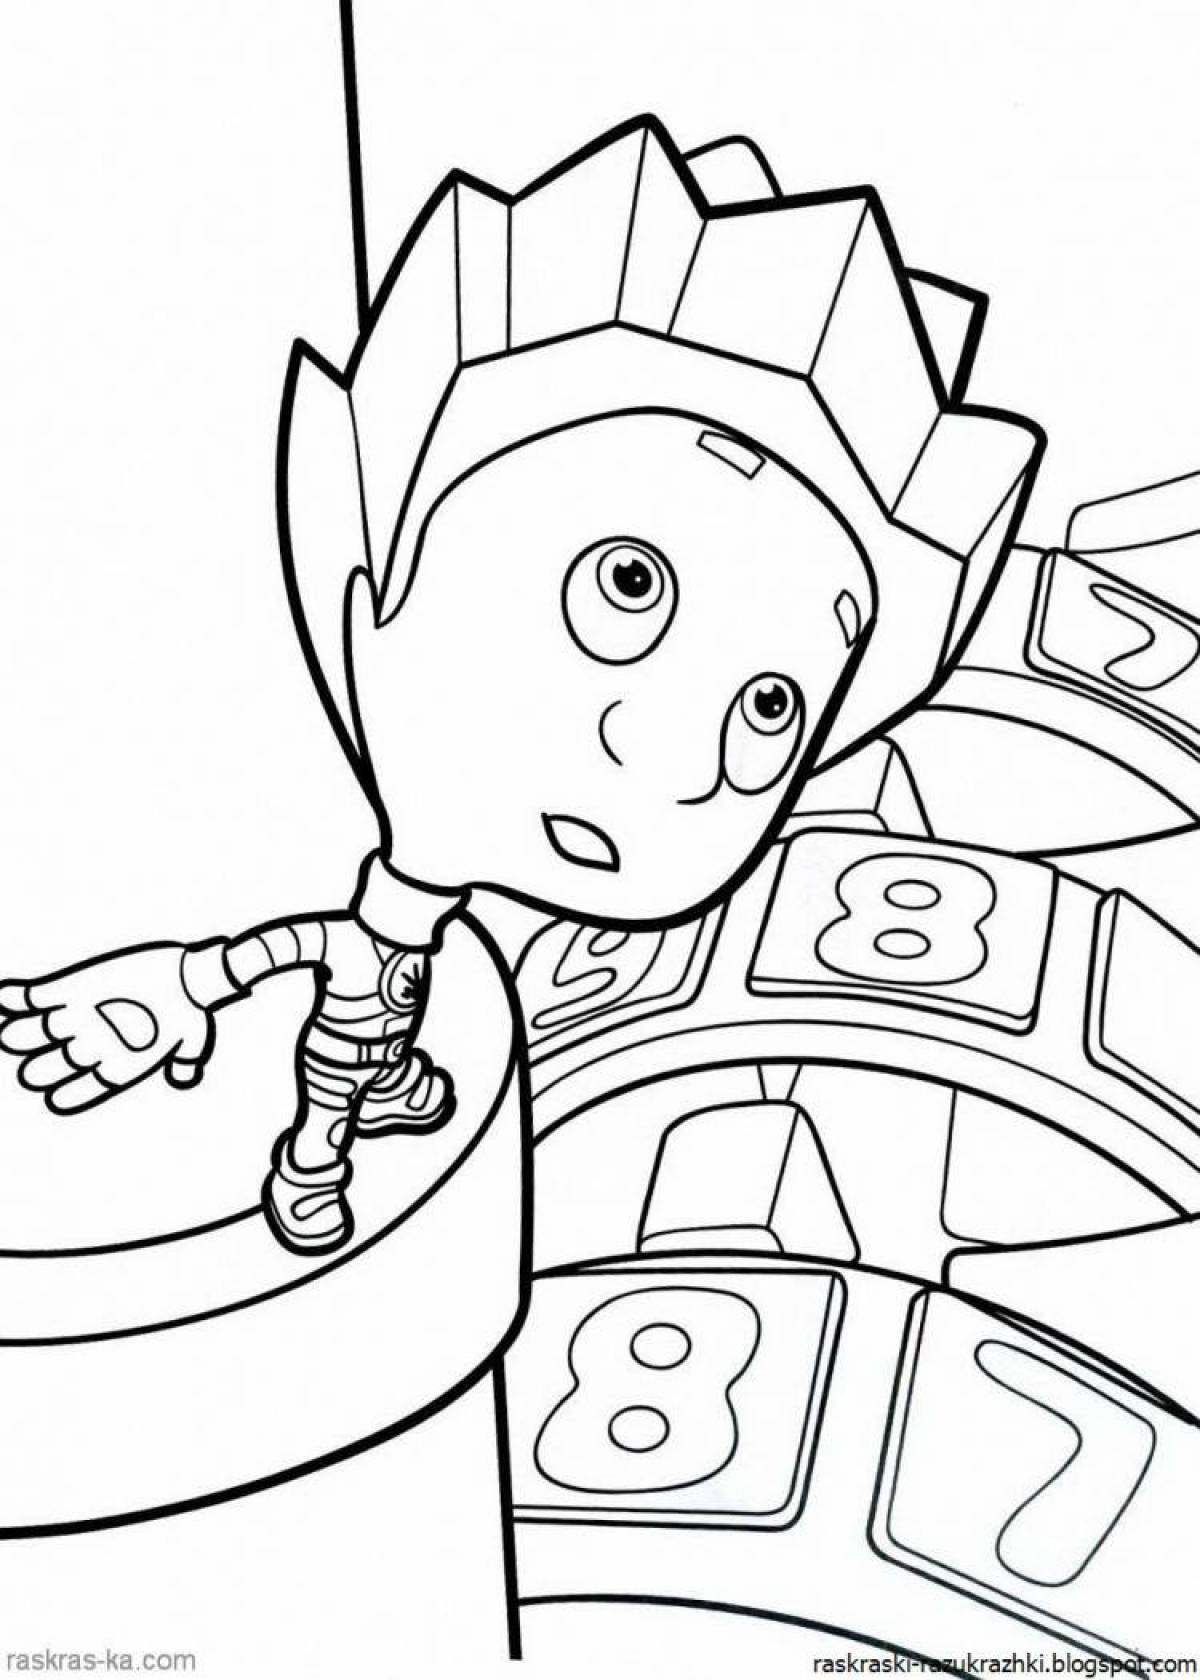 Radiant fixies coloring pages for kids